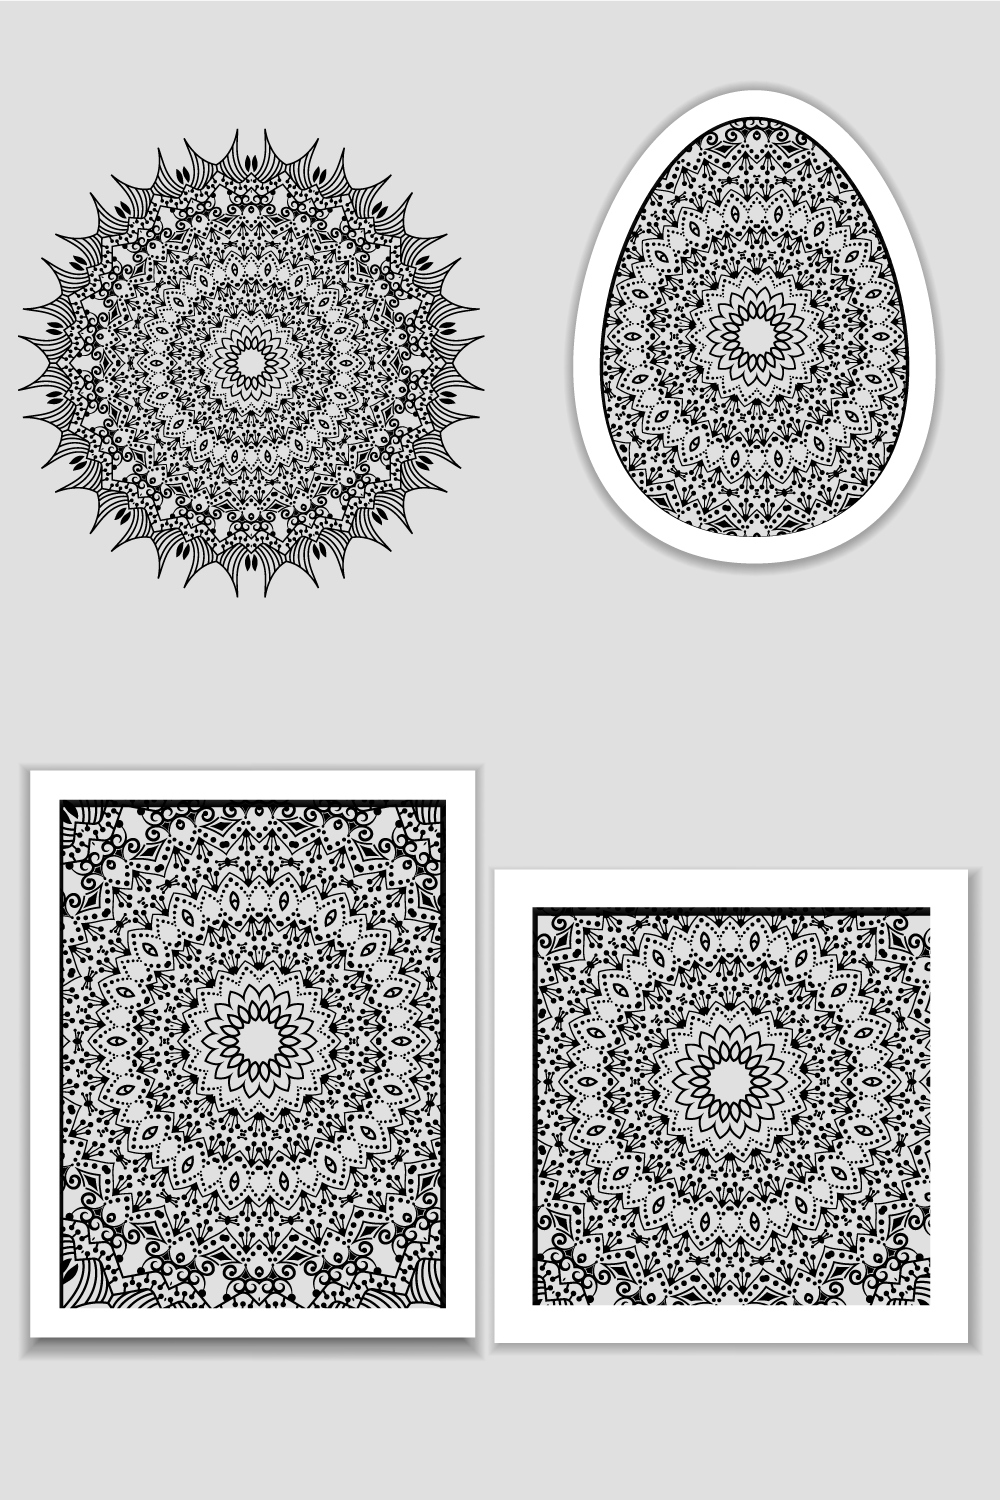 Luxury Mandala Background For Book Cover, Wedding Invitation, Or Other Project - Pinterest.